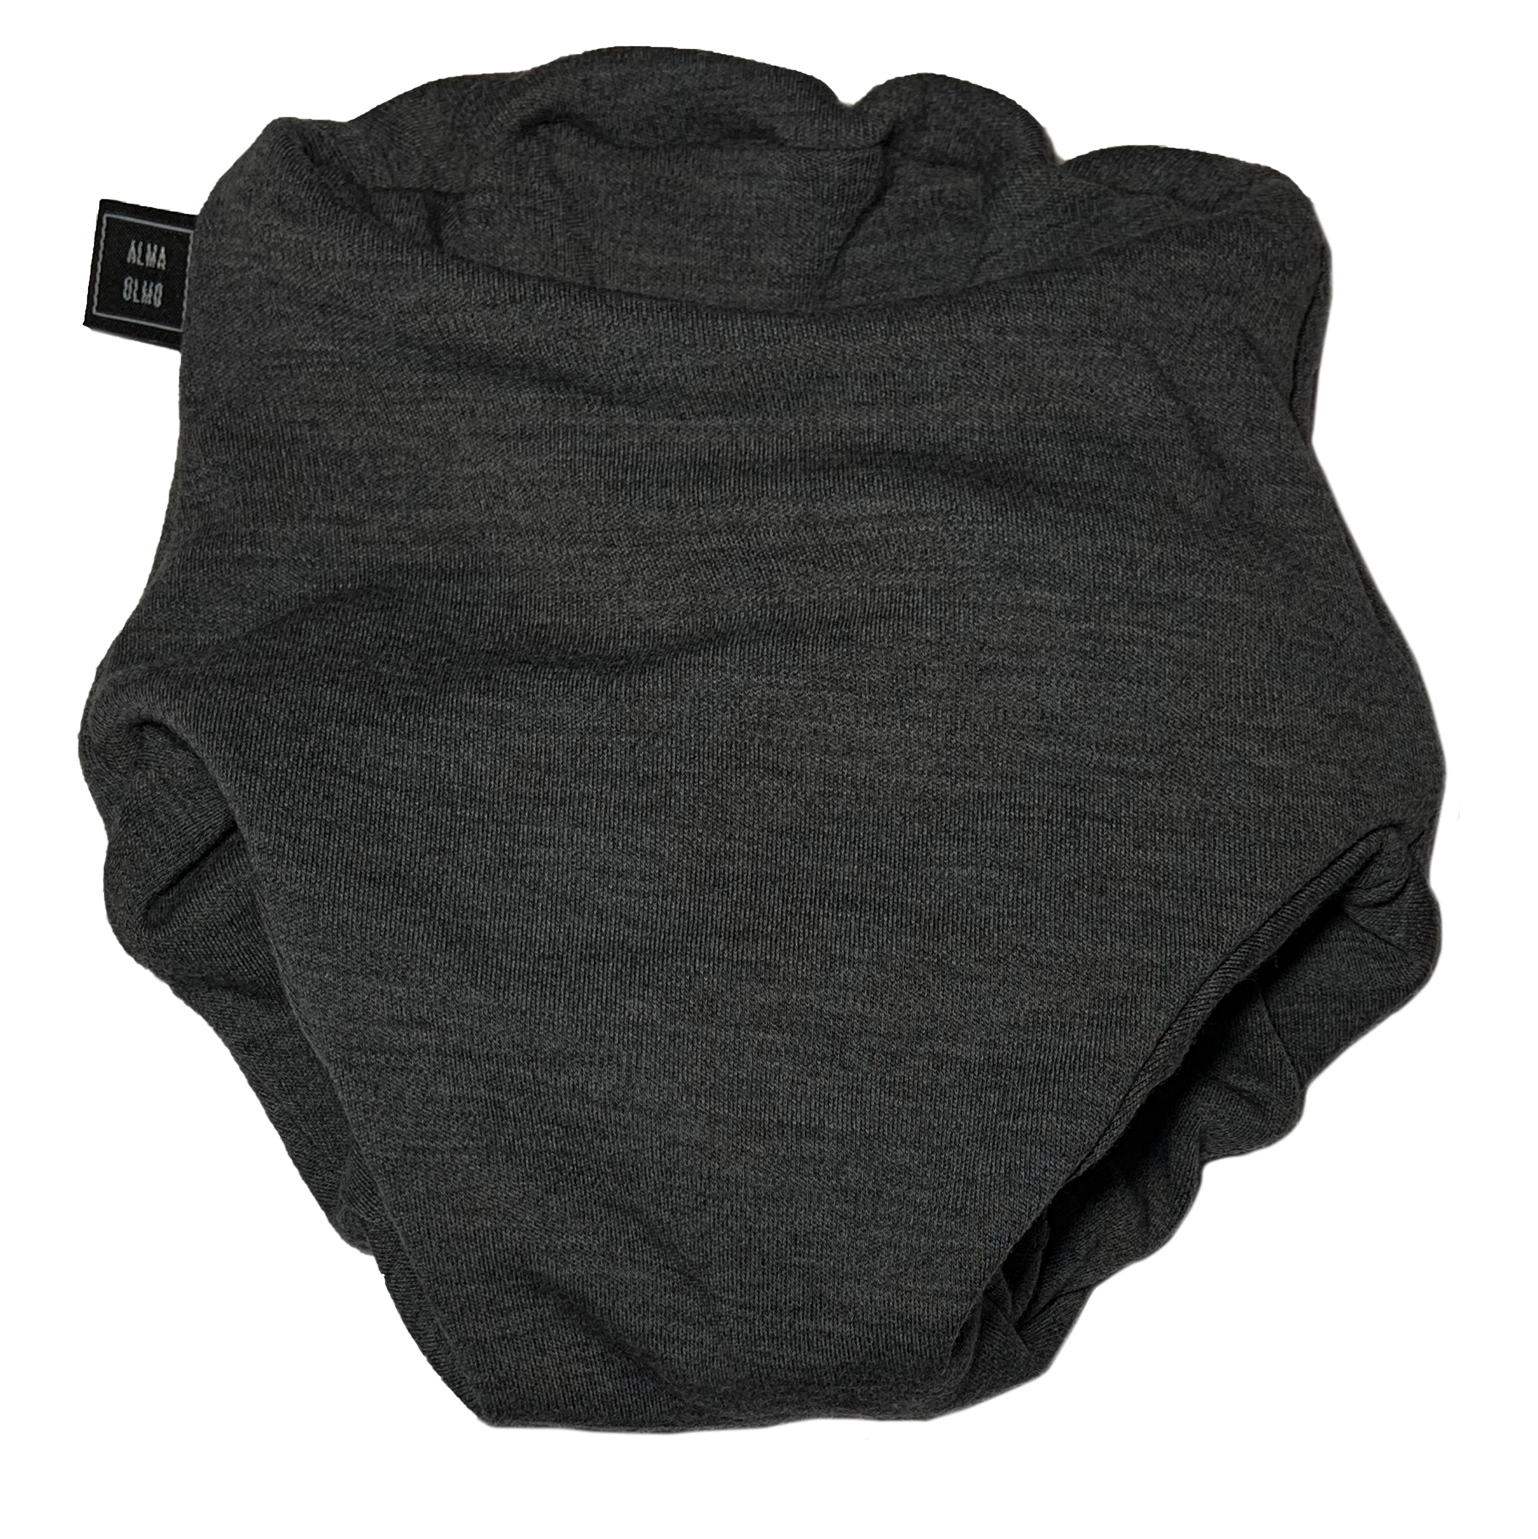 A dark grey cloth nappy viewed from the front